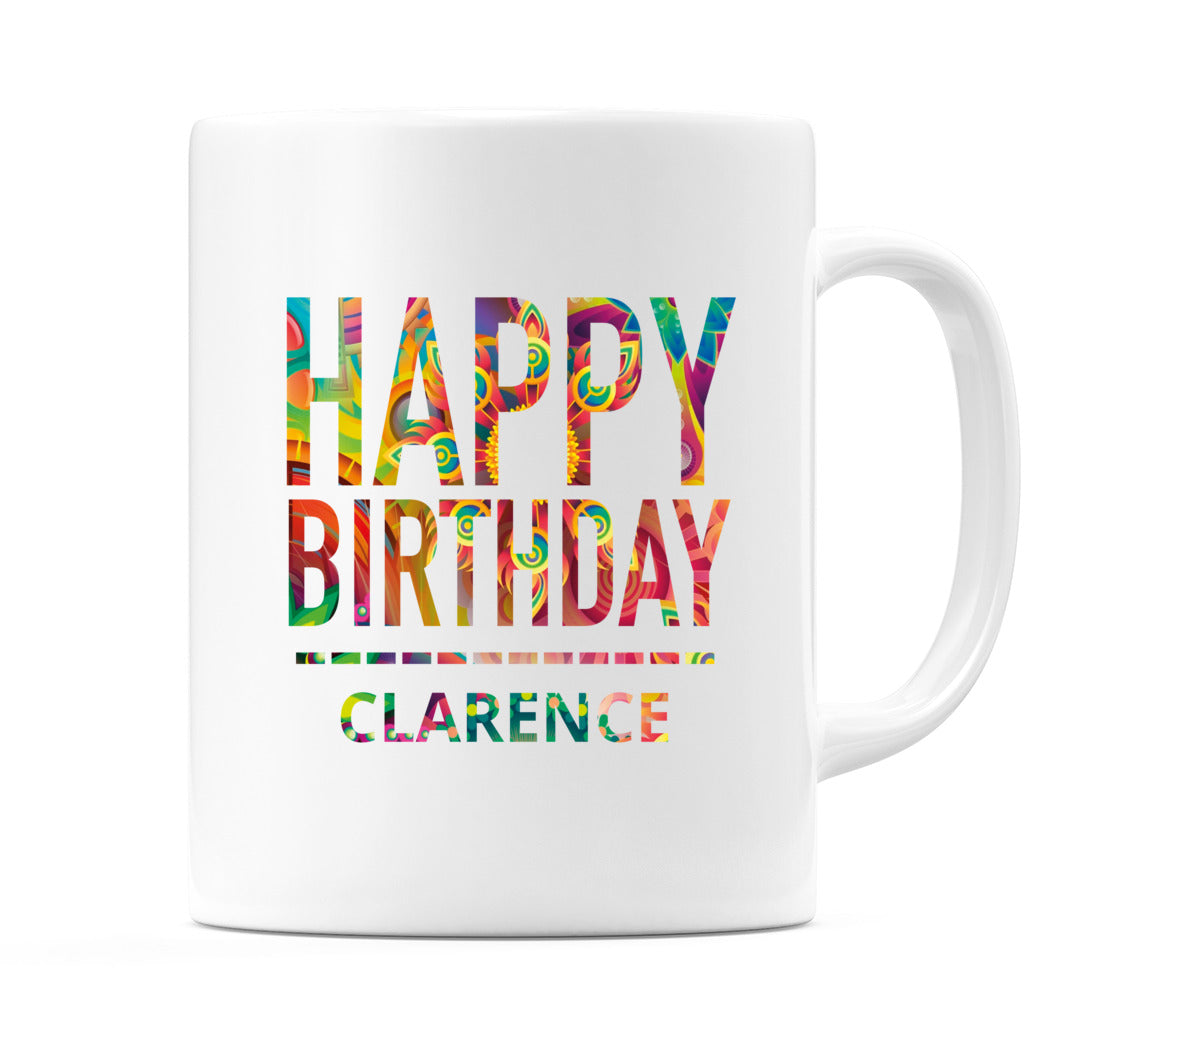 Happy Birthday Clarence (Tie Dye Effect) Mug Cup by WeDoMugs